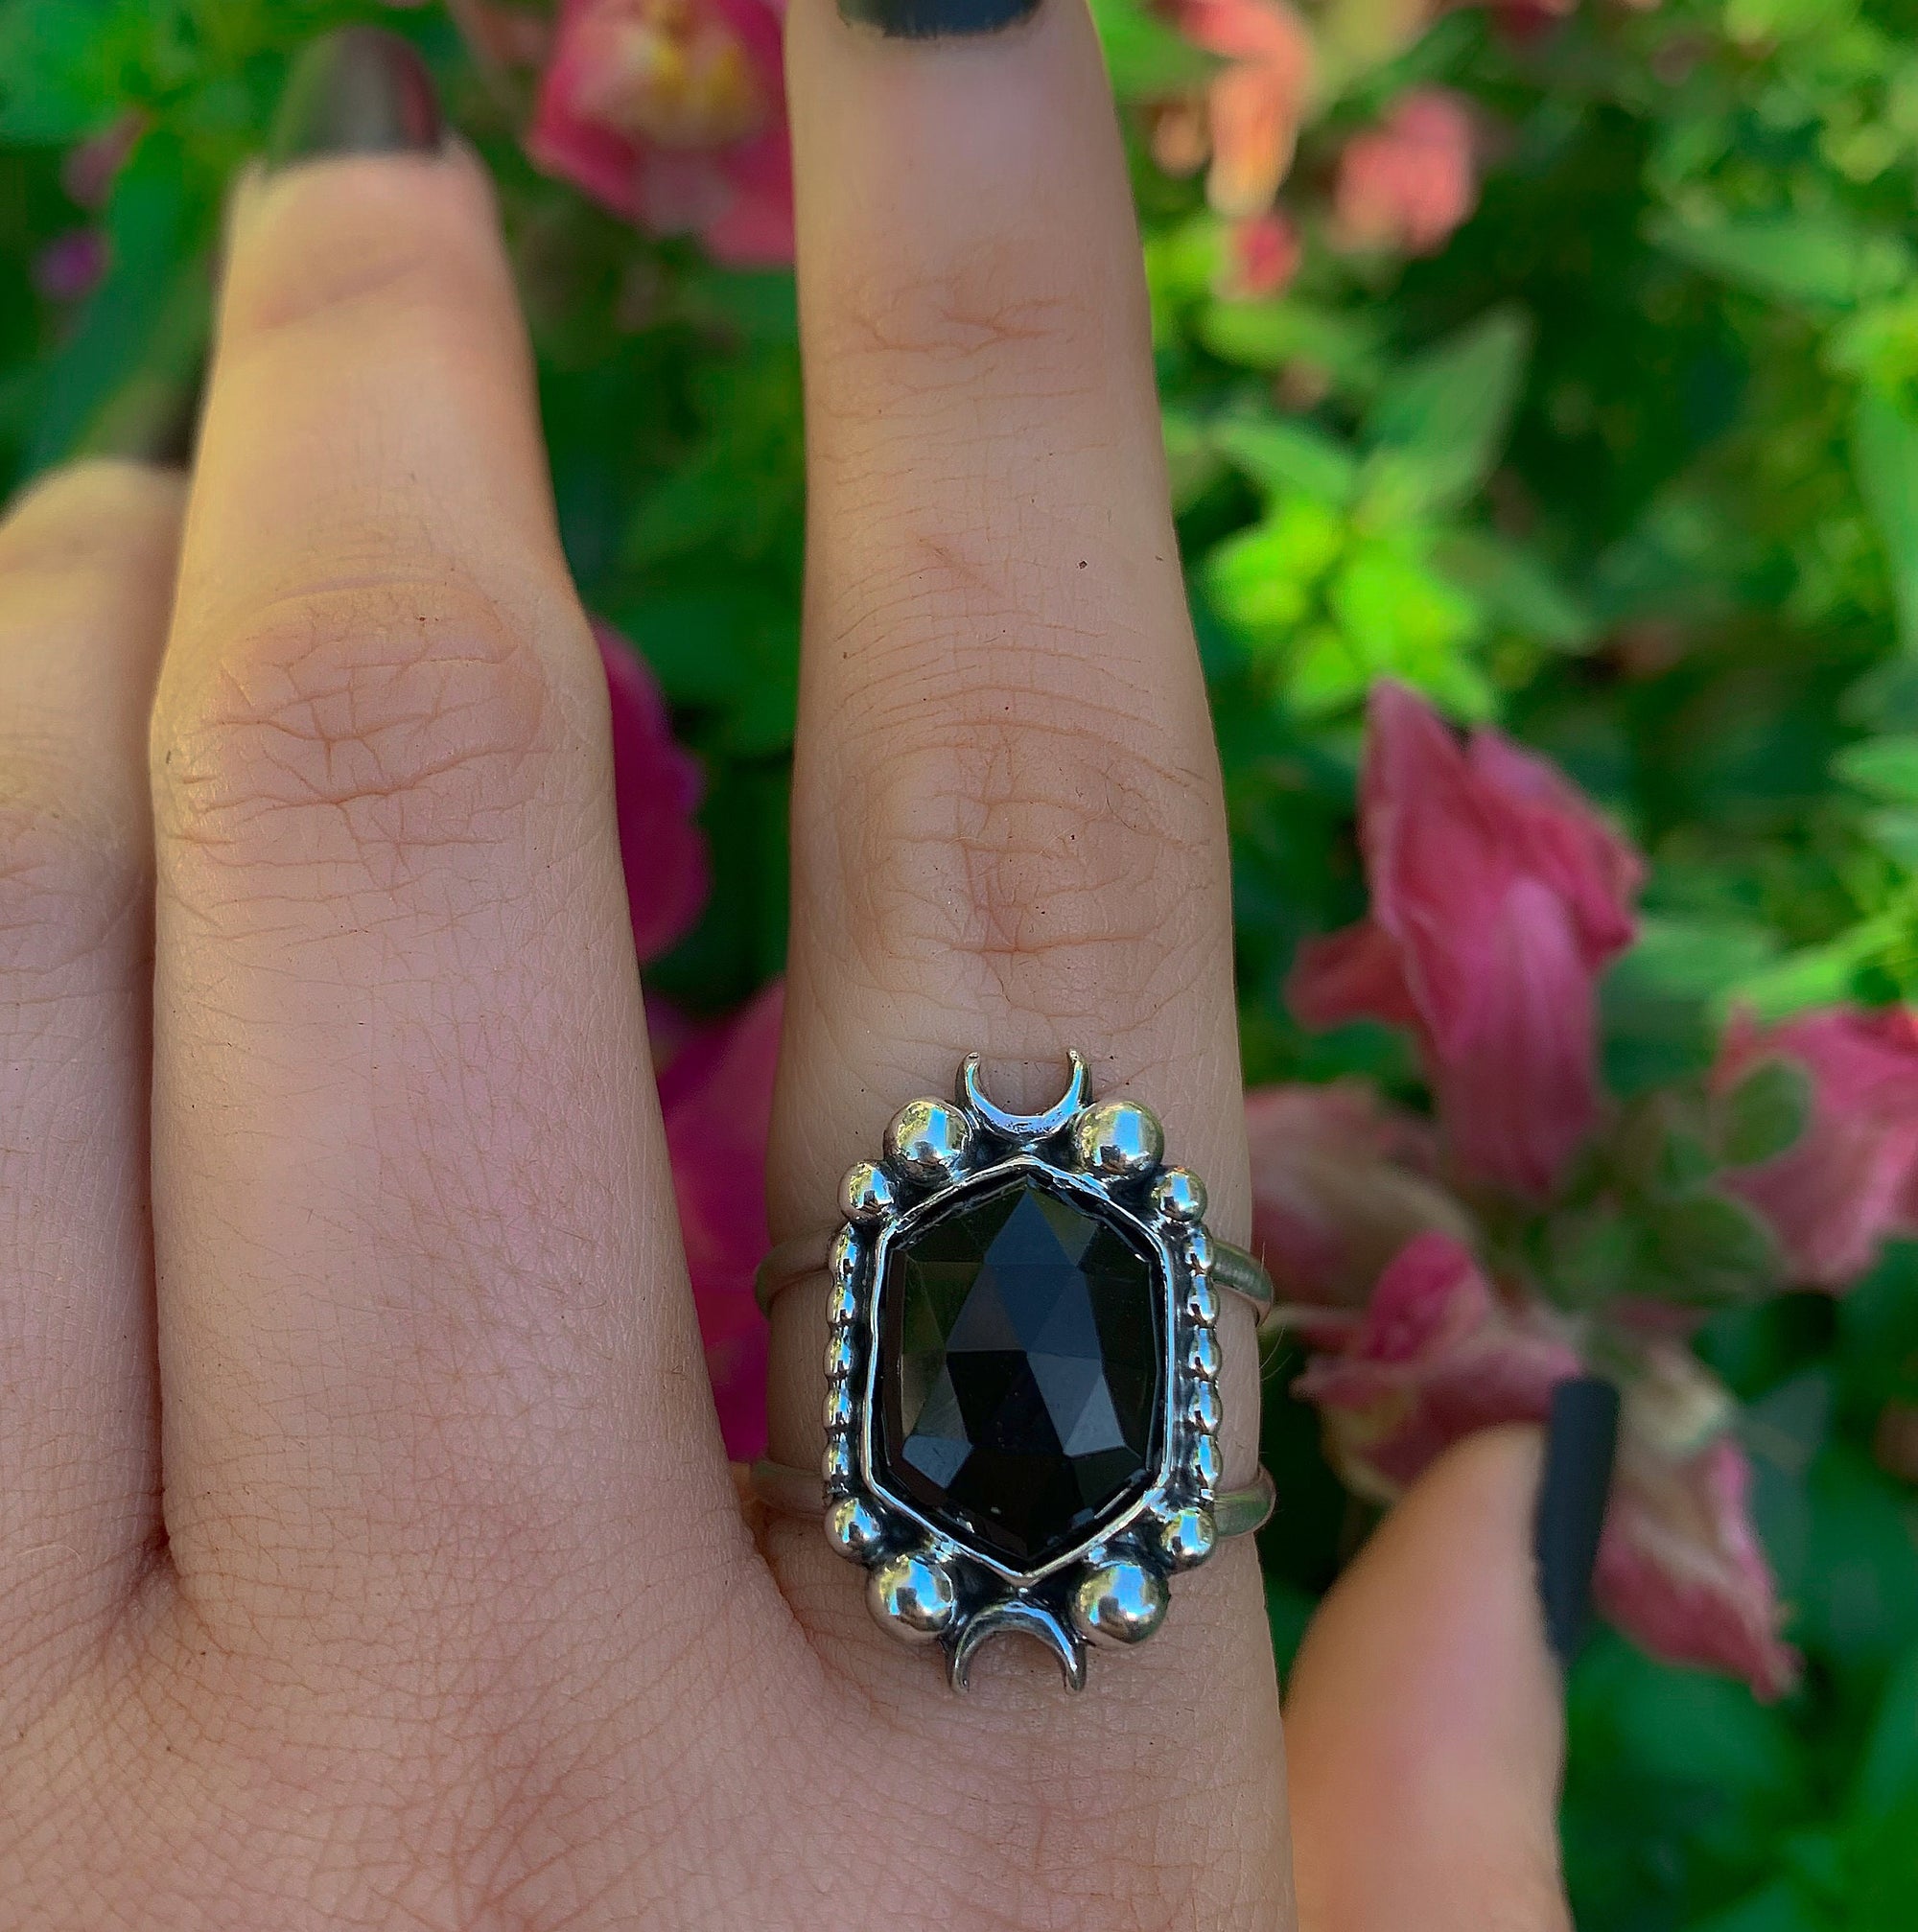 Rose Cut Black Onyx Ring - Size 8 1/2 - Sterling Silver - Hexagonal Onyx Ring - Faceted Onyx Moon Ring, Black Gemstone Crescent Moon Jewelry